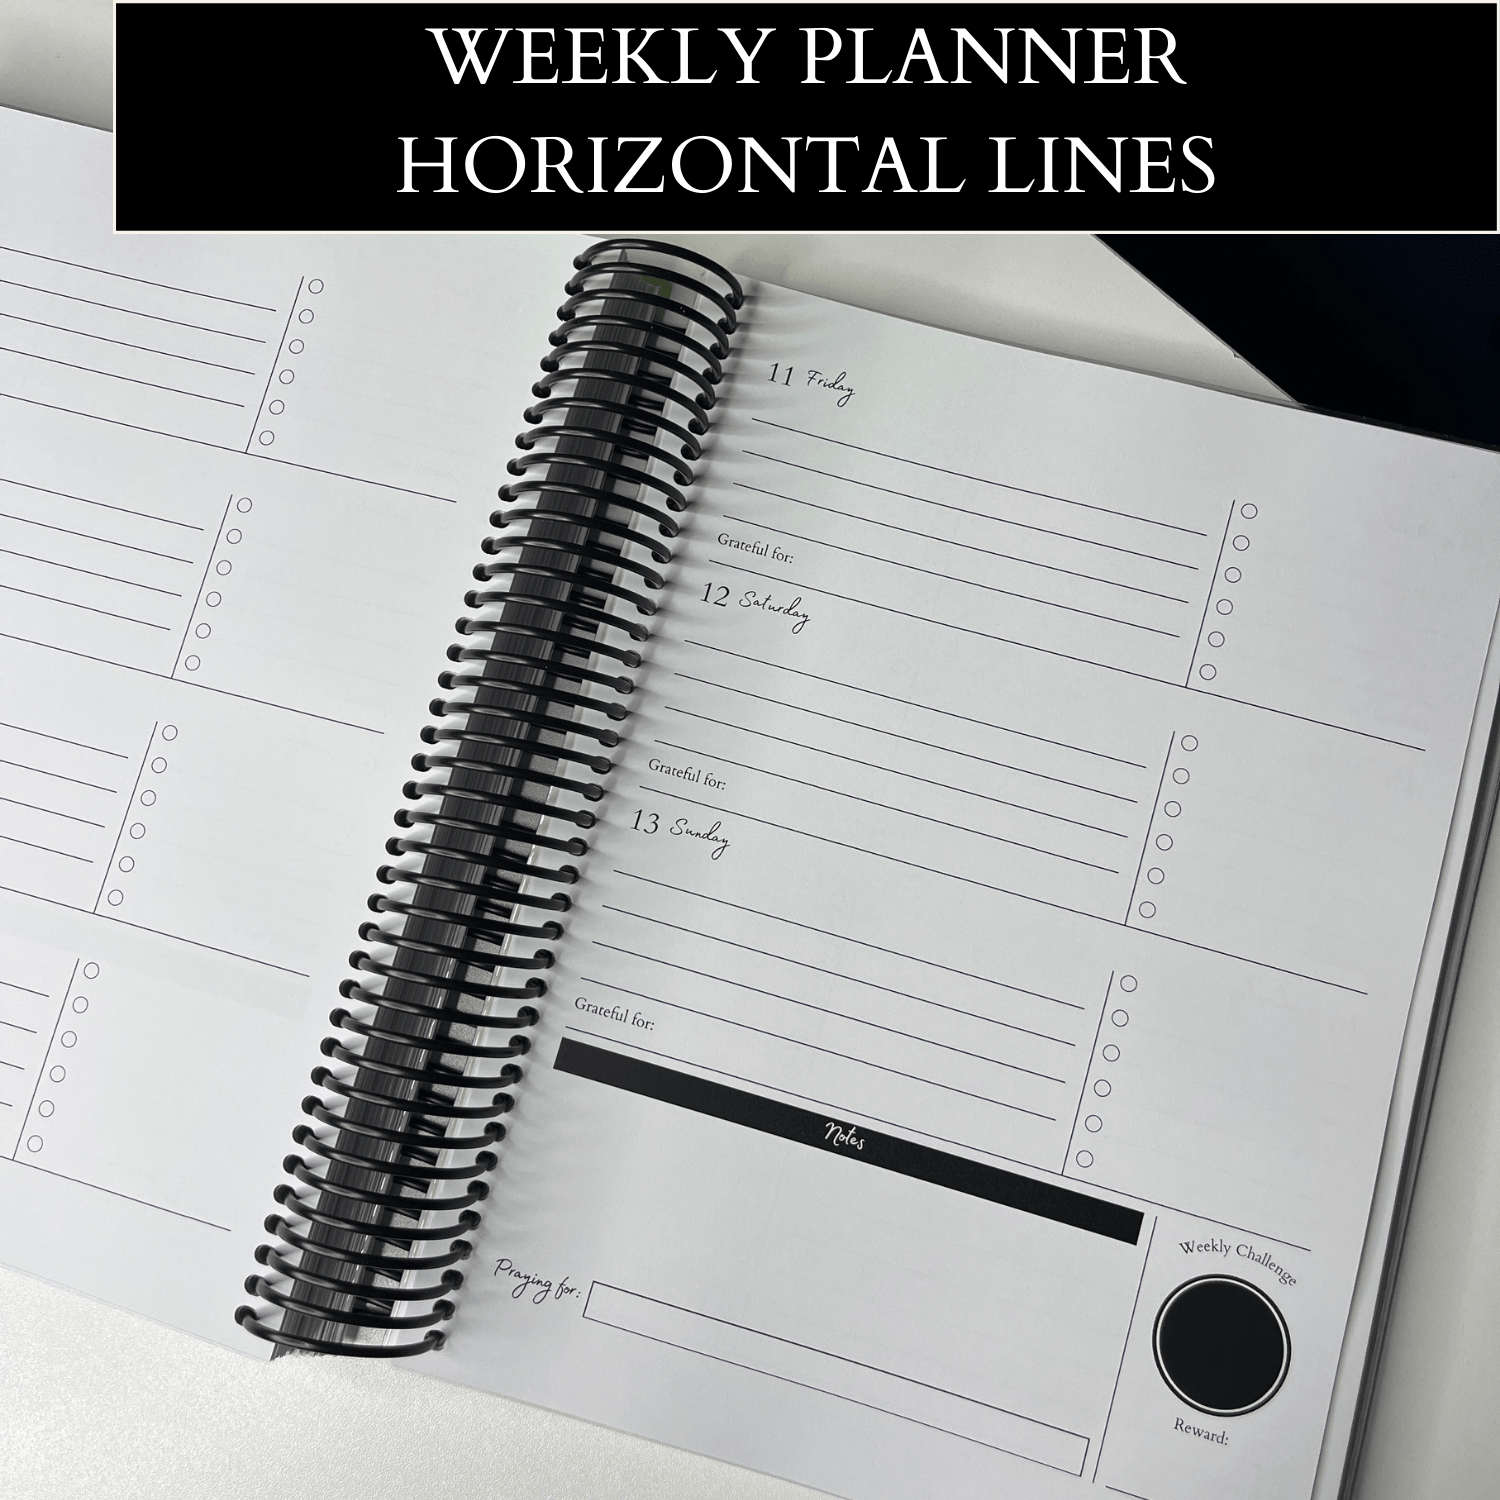 THE ULTIMATE PLANNER GIRL